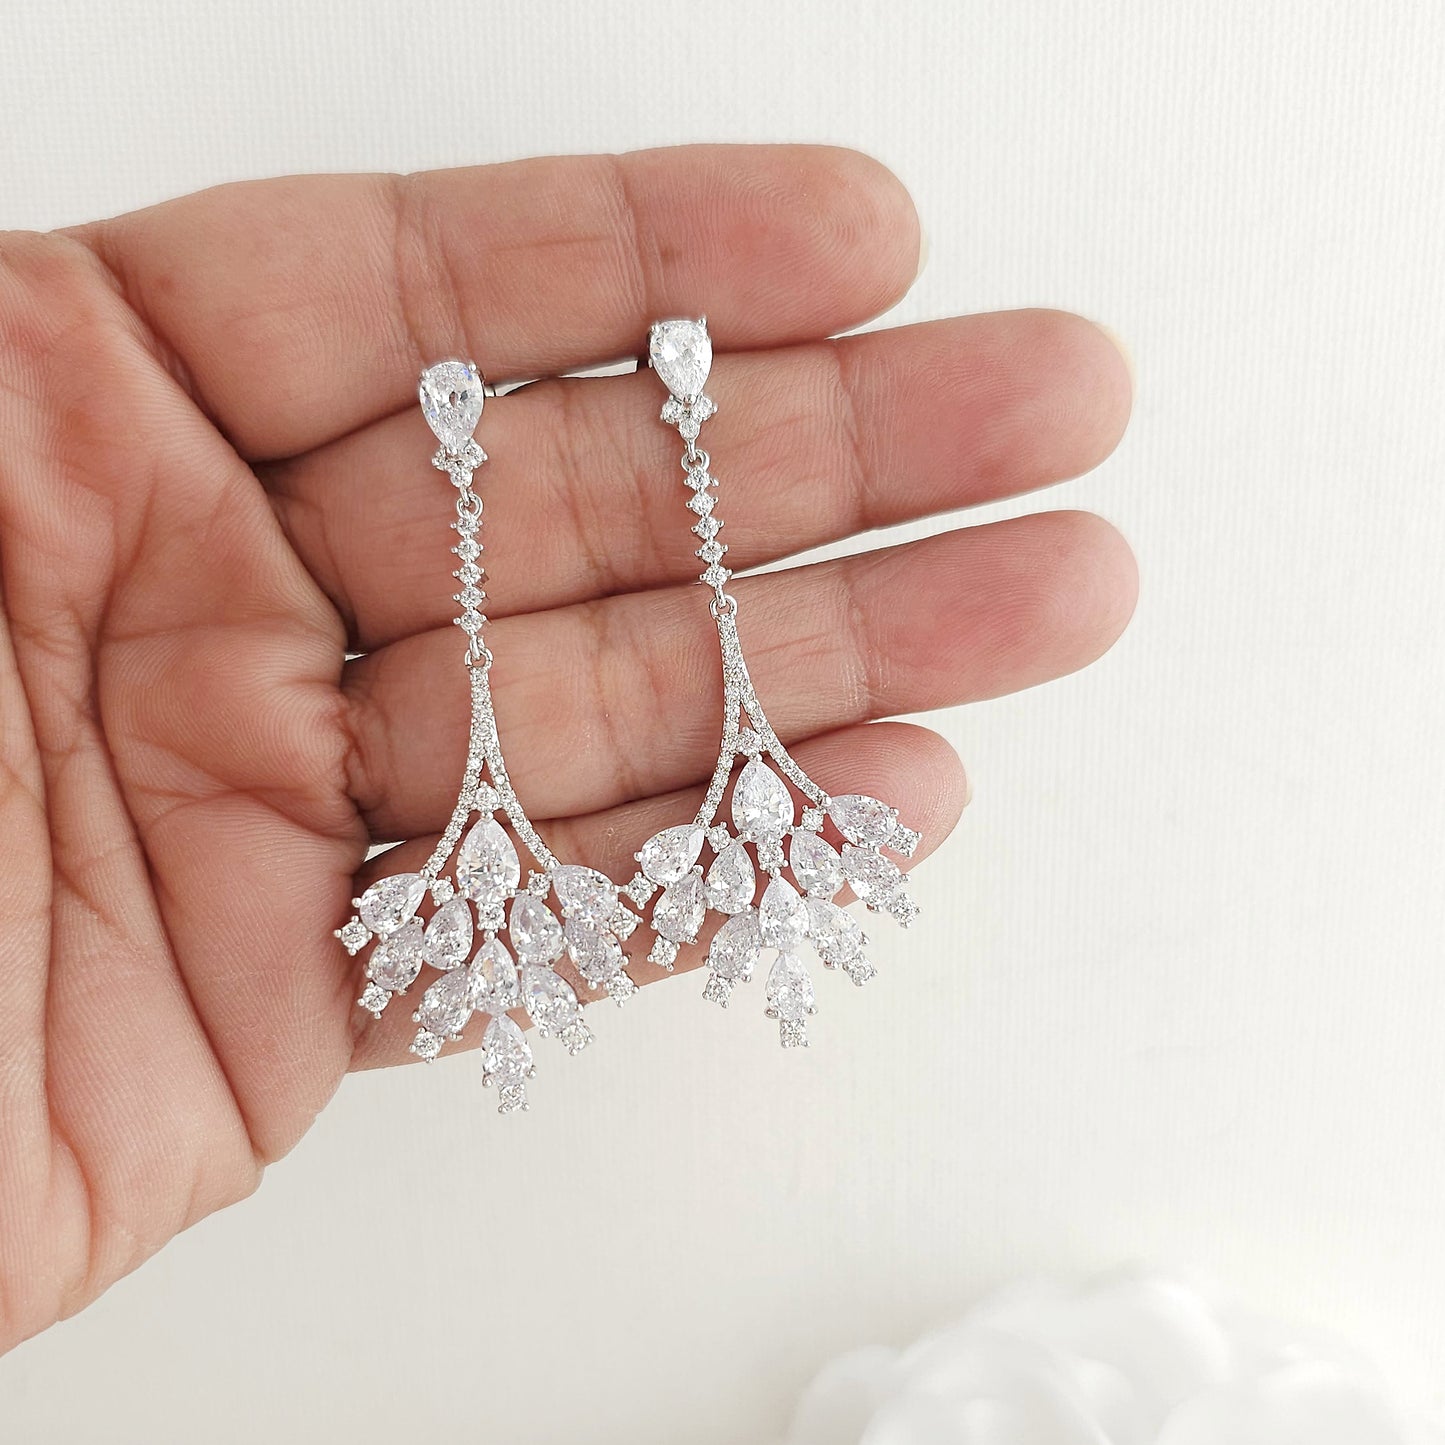 Dangling Chandelier Earrings for Wedding and Special Occasions-Yana